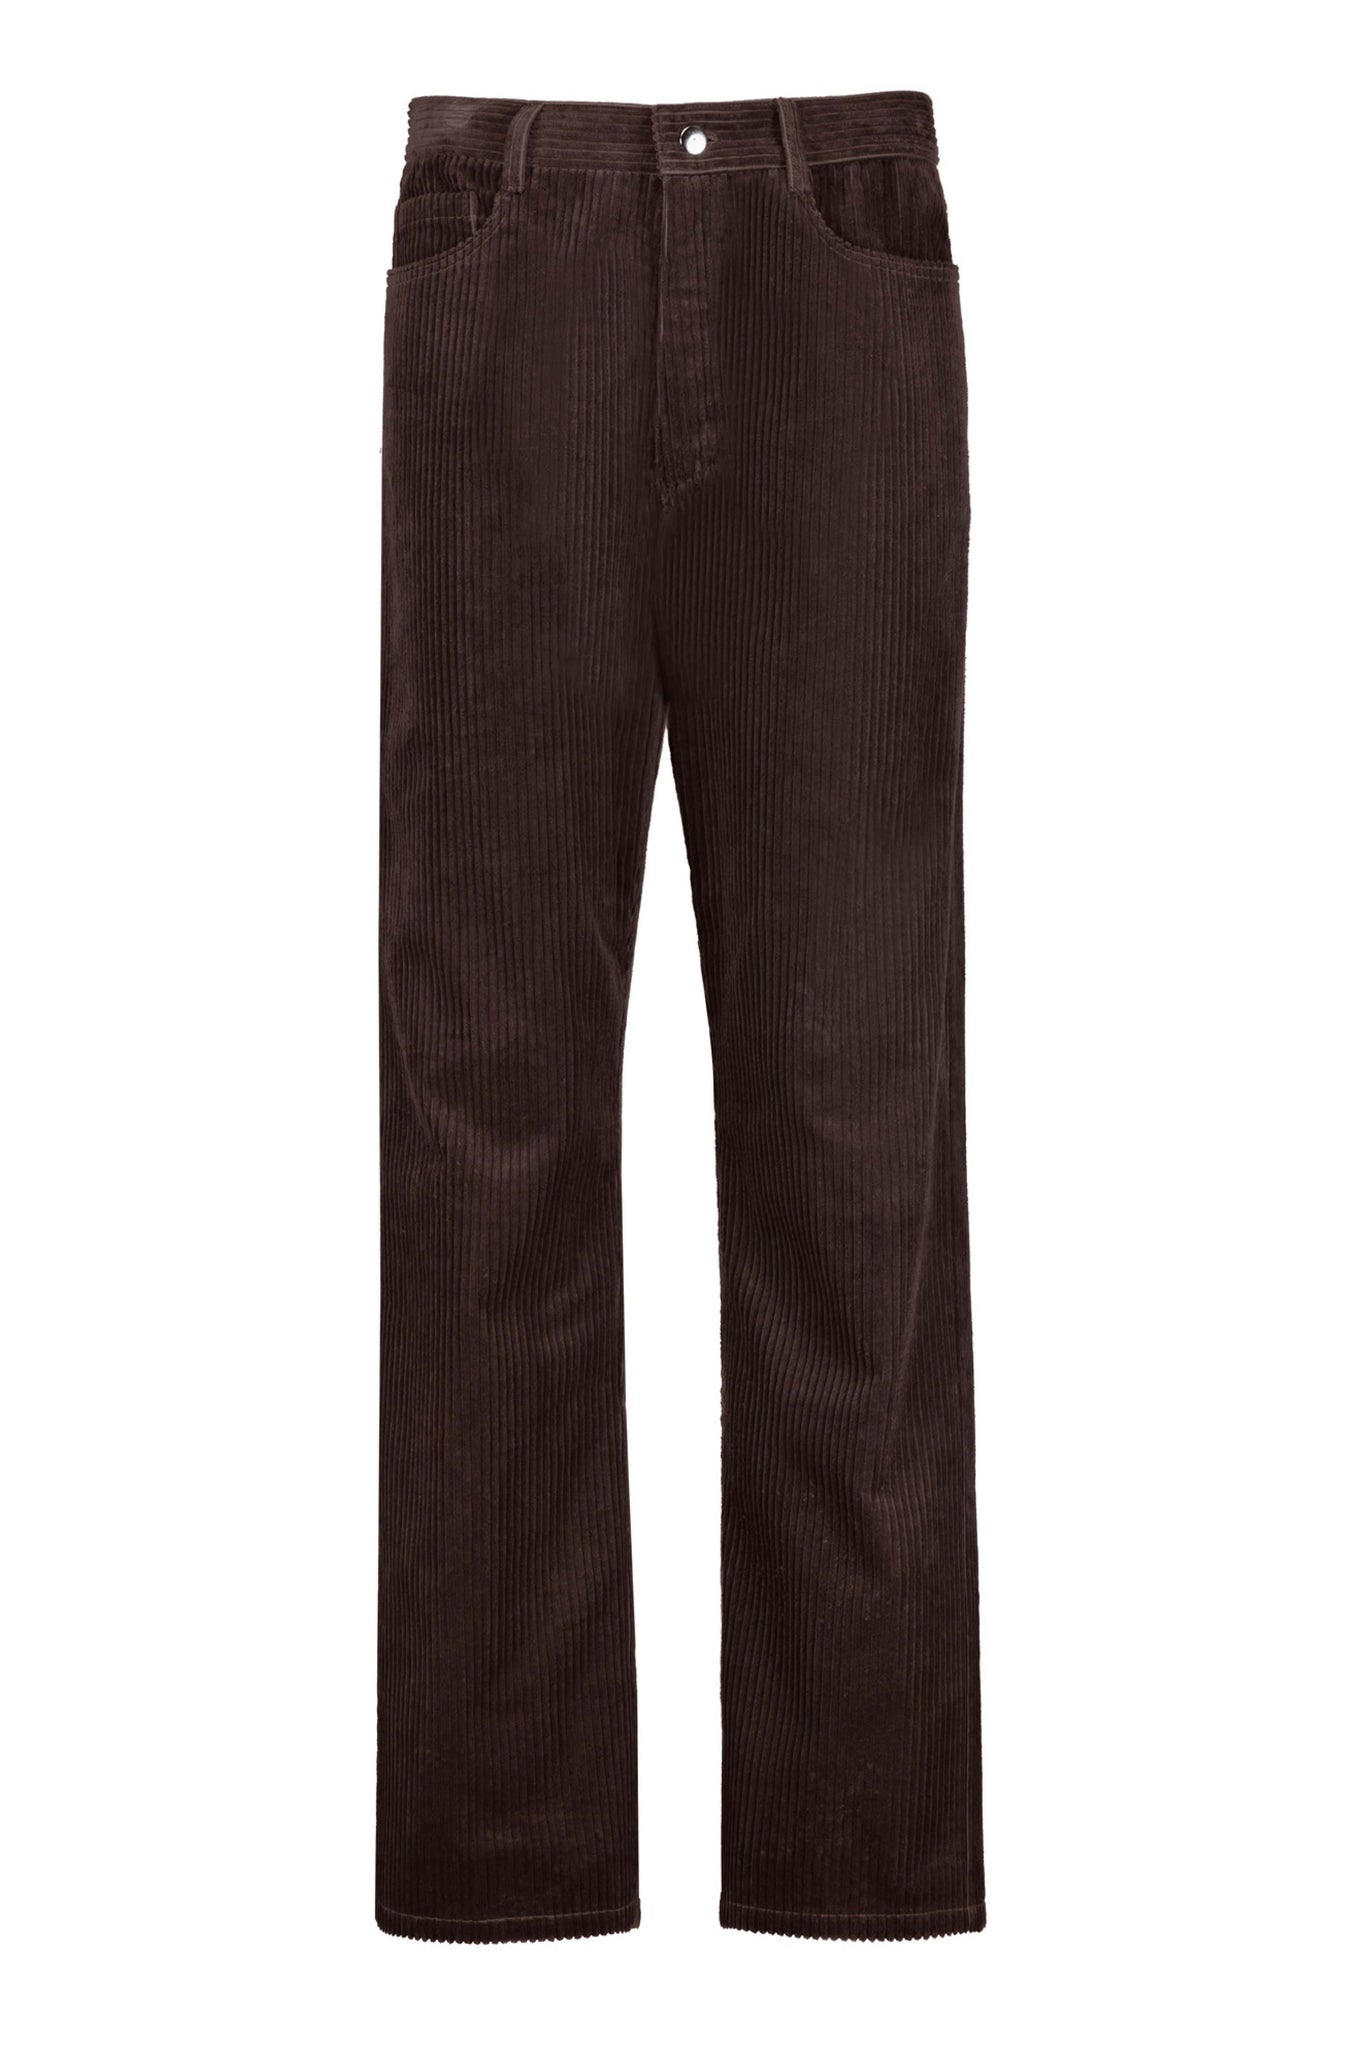 Harry trousers brown